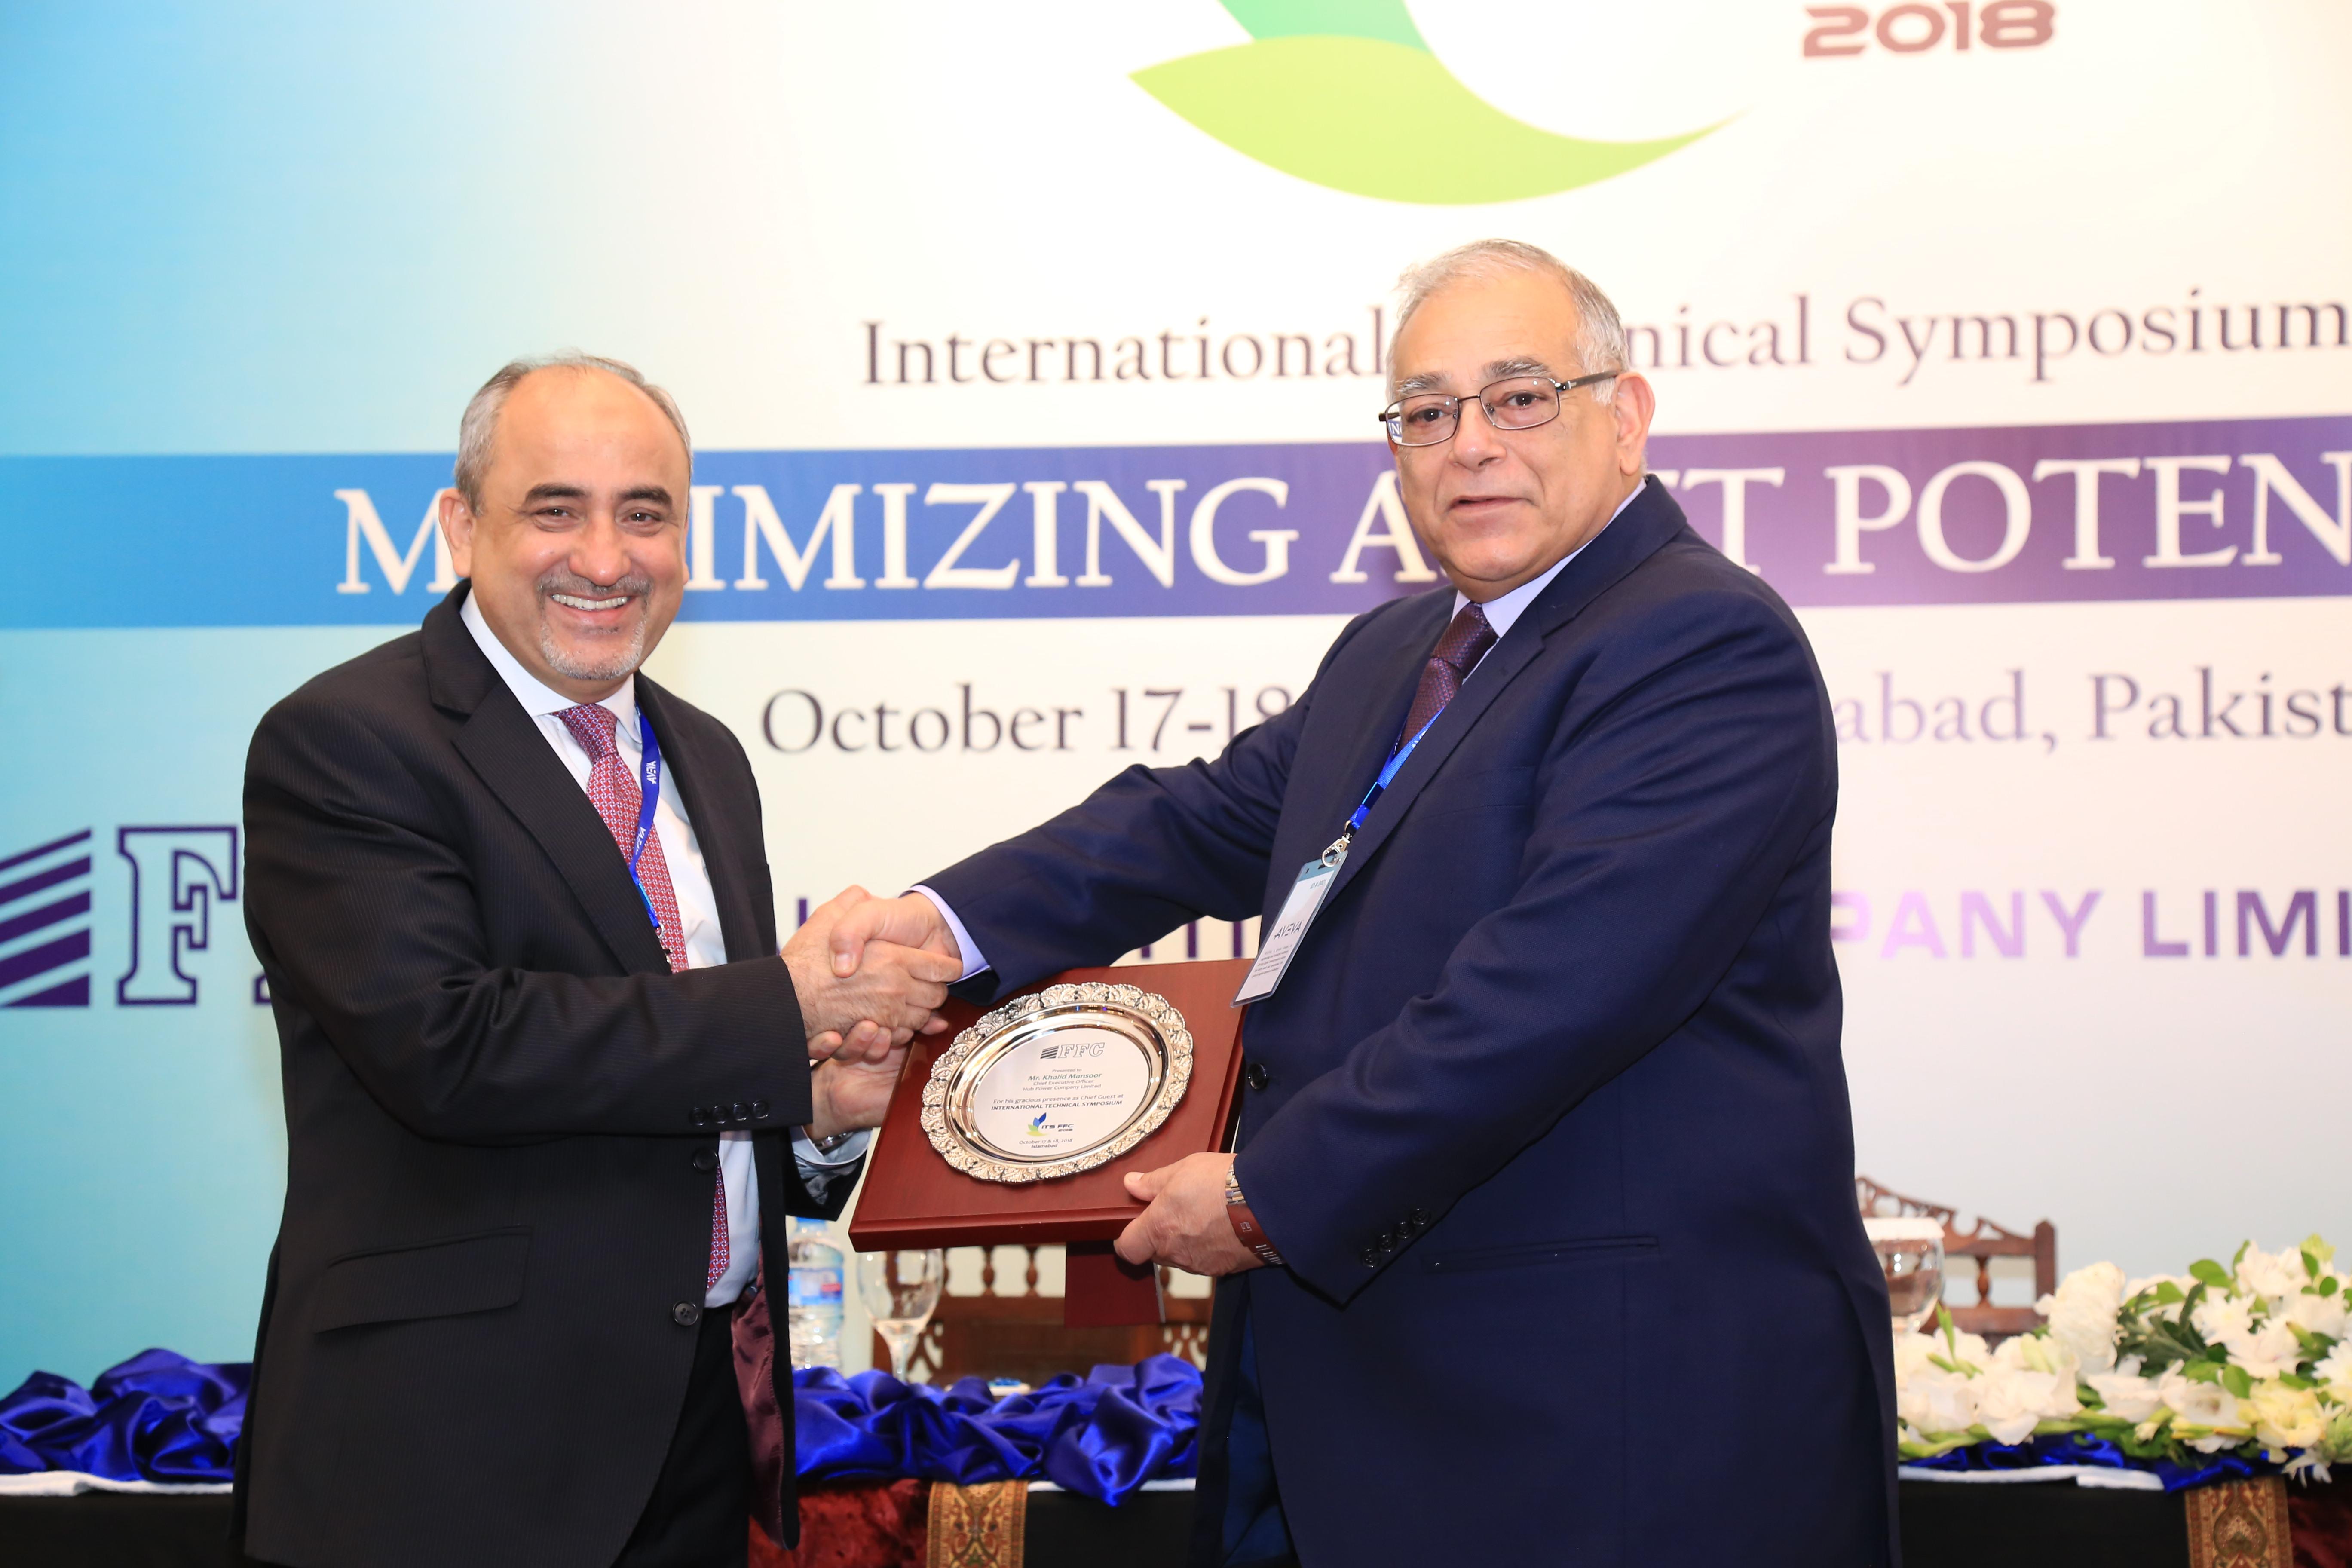 International Technical Symposium by FFC concludes successfully